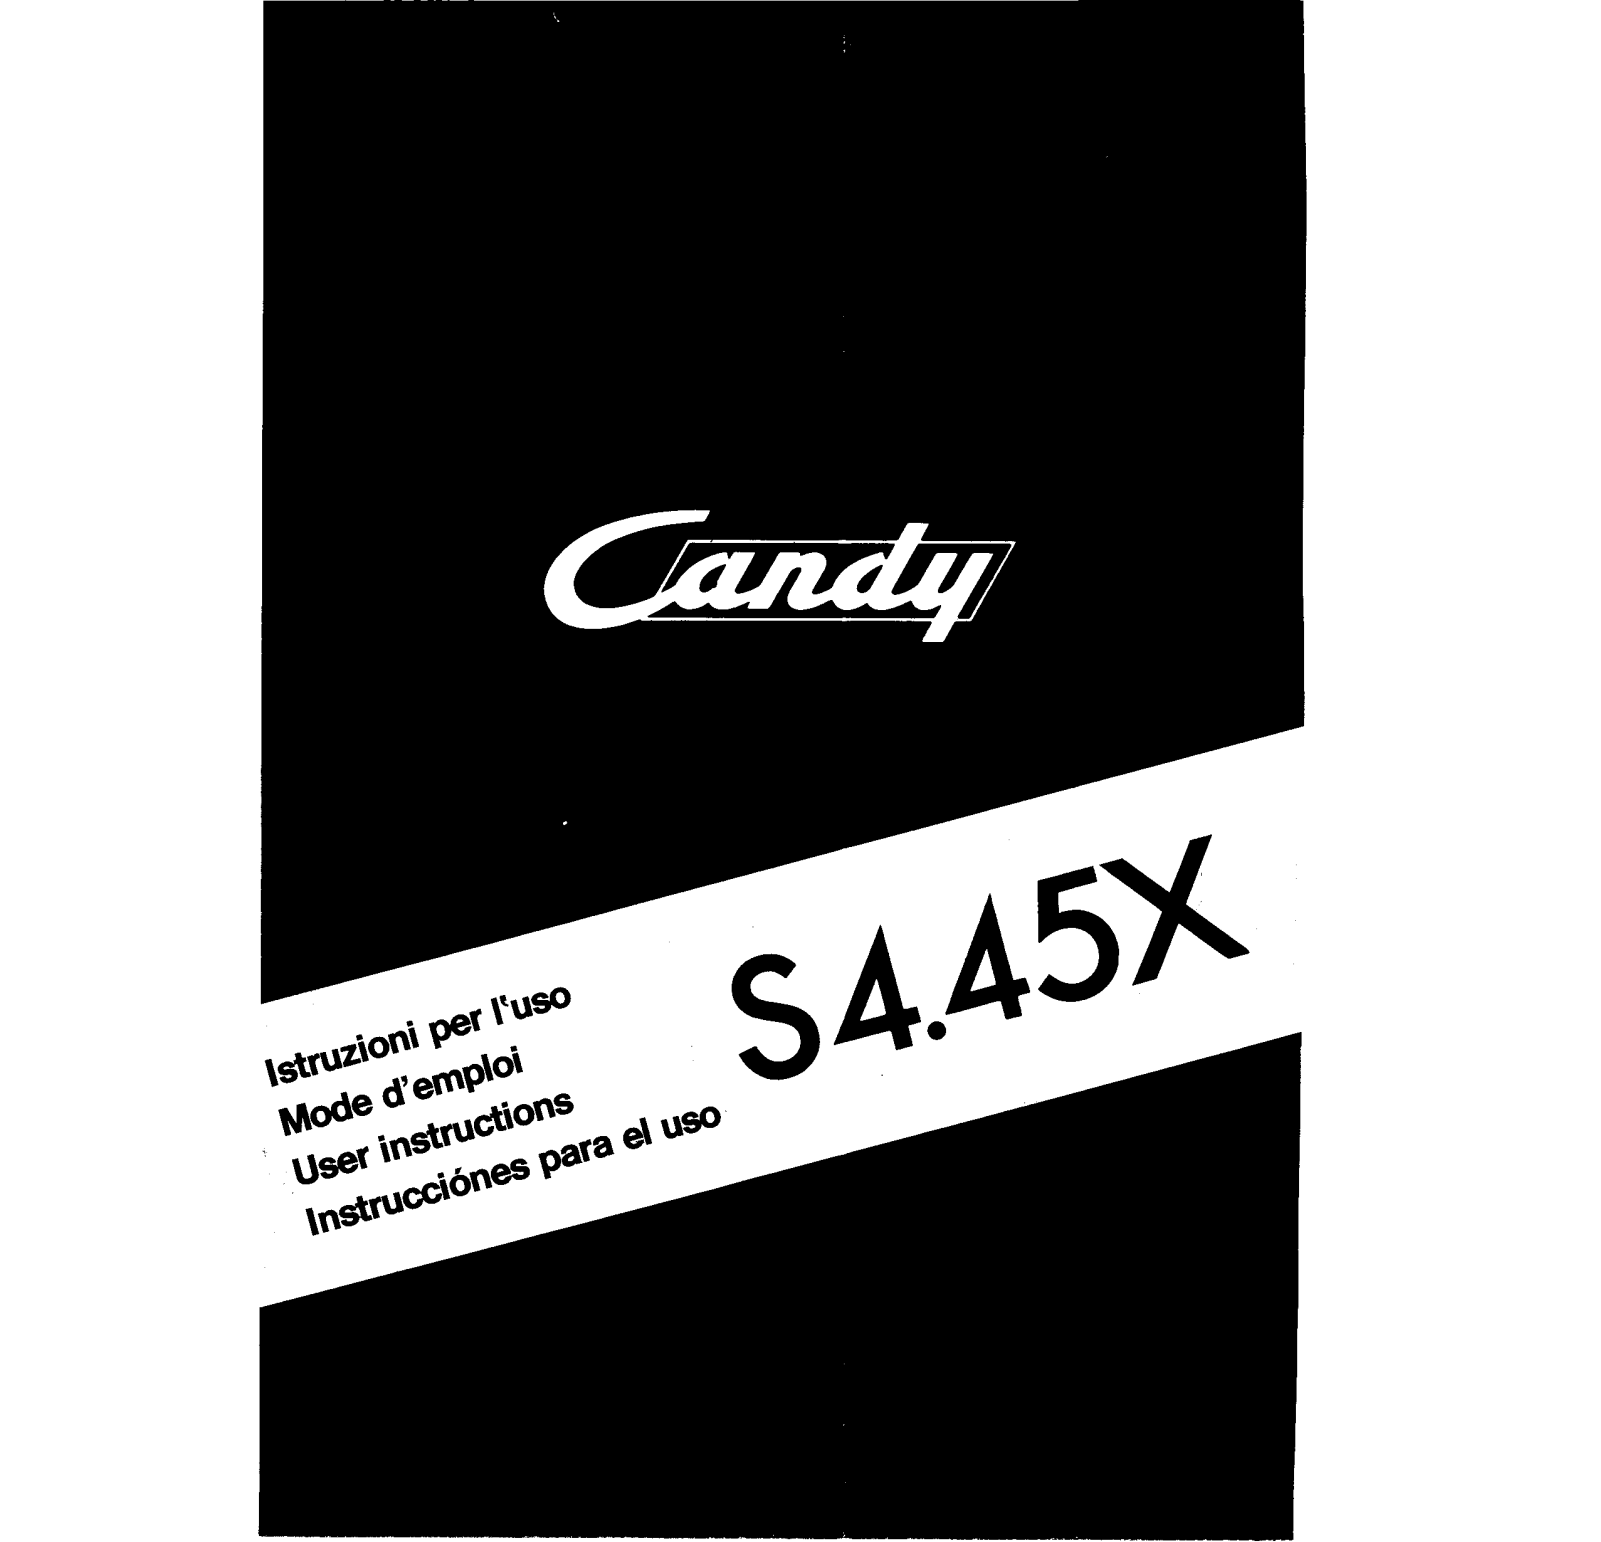 Candy S 4.45X User Manual